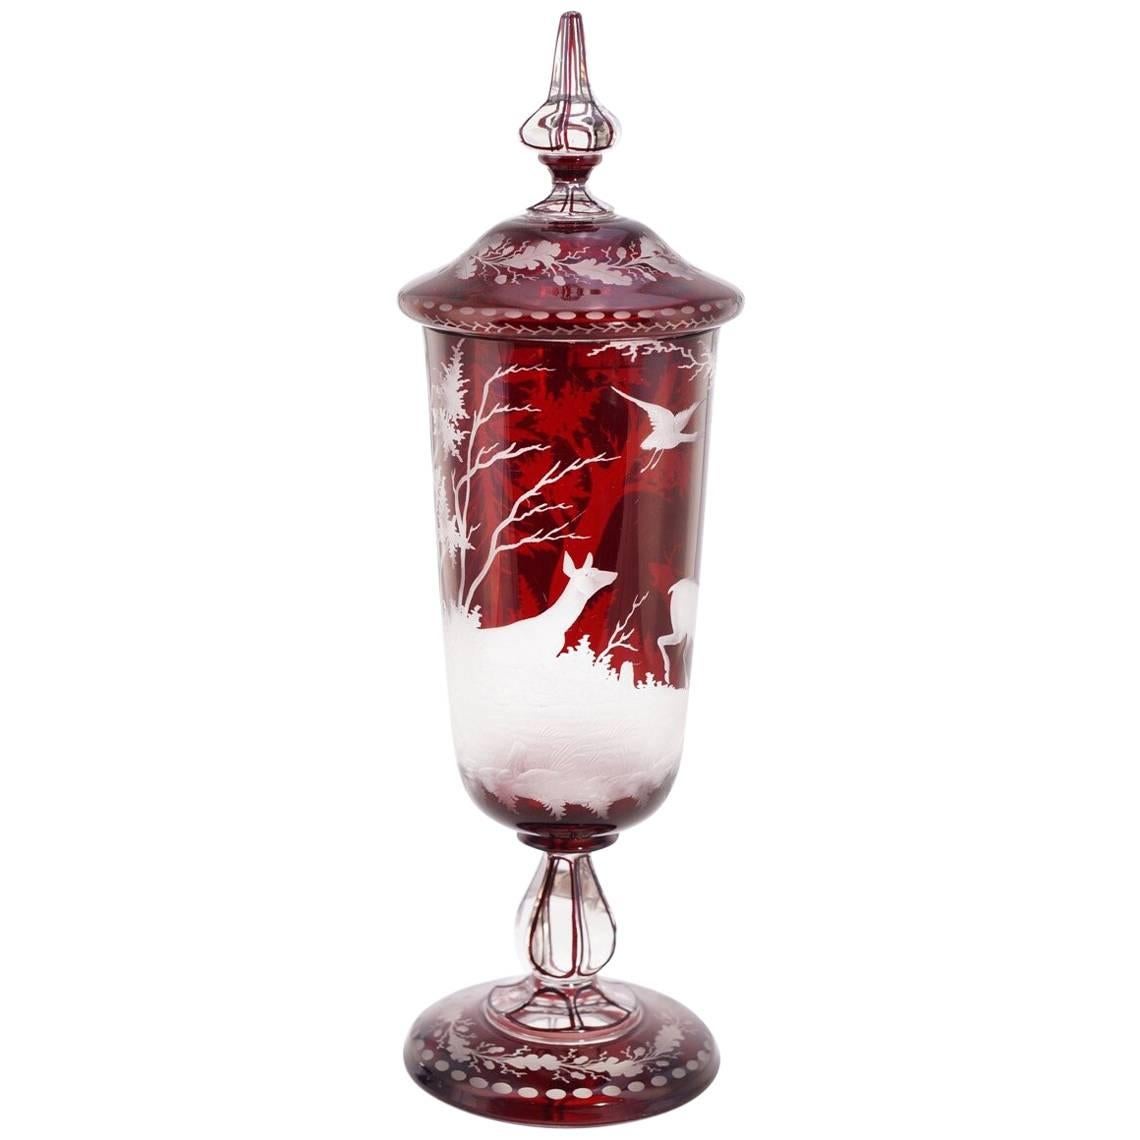 Large Bohemian Ruby Covered Goblet Engraved with Deer and Bird, circa 1880